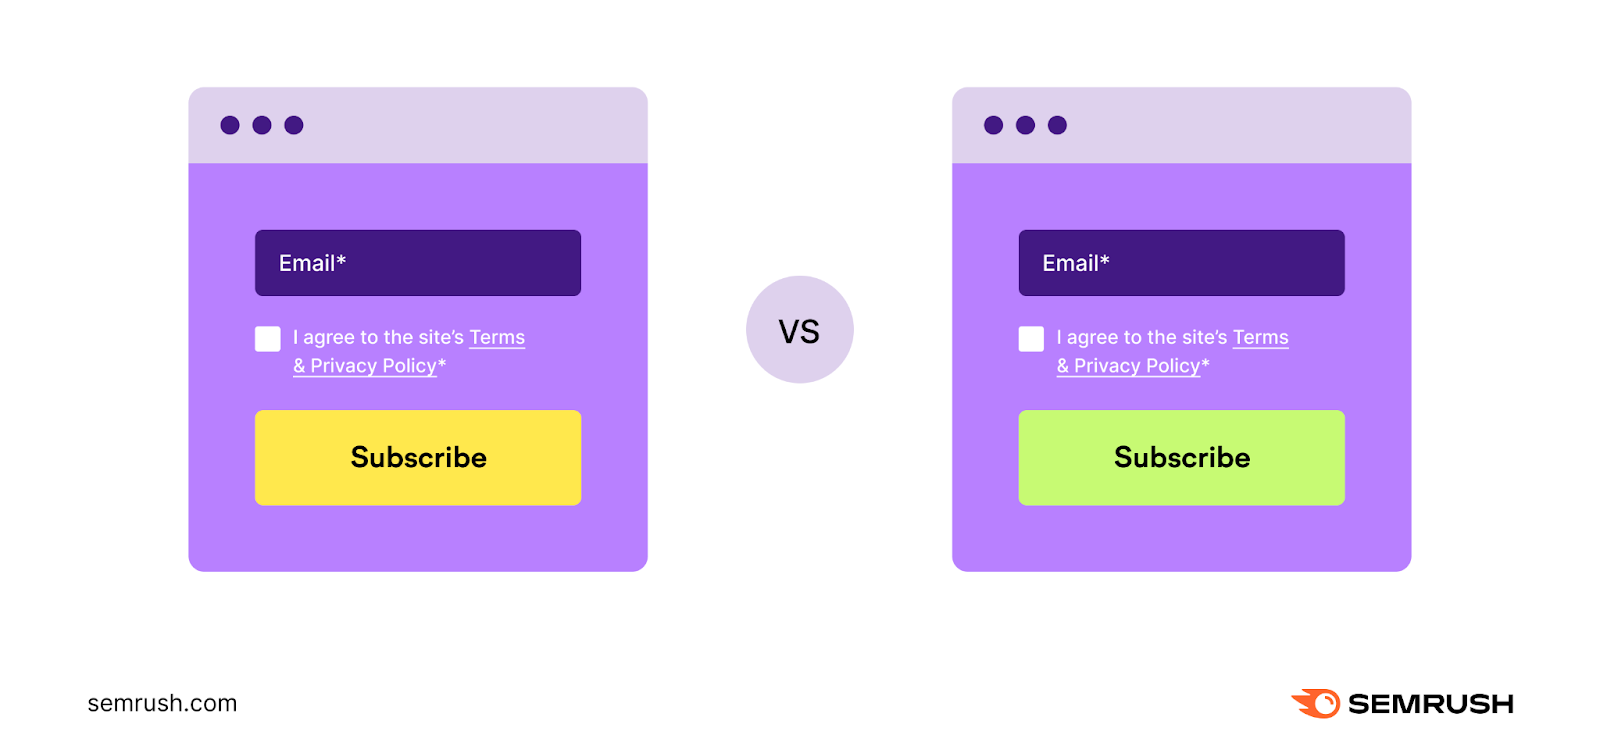 an infographic showing two email opt-in forms with different variables